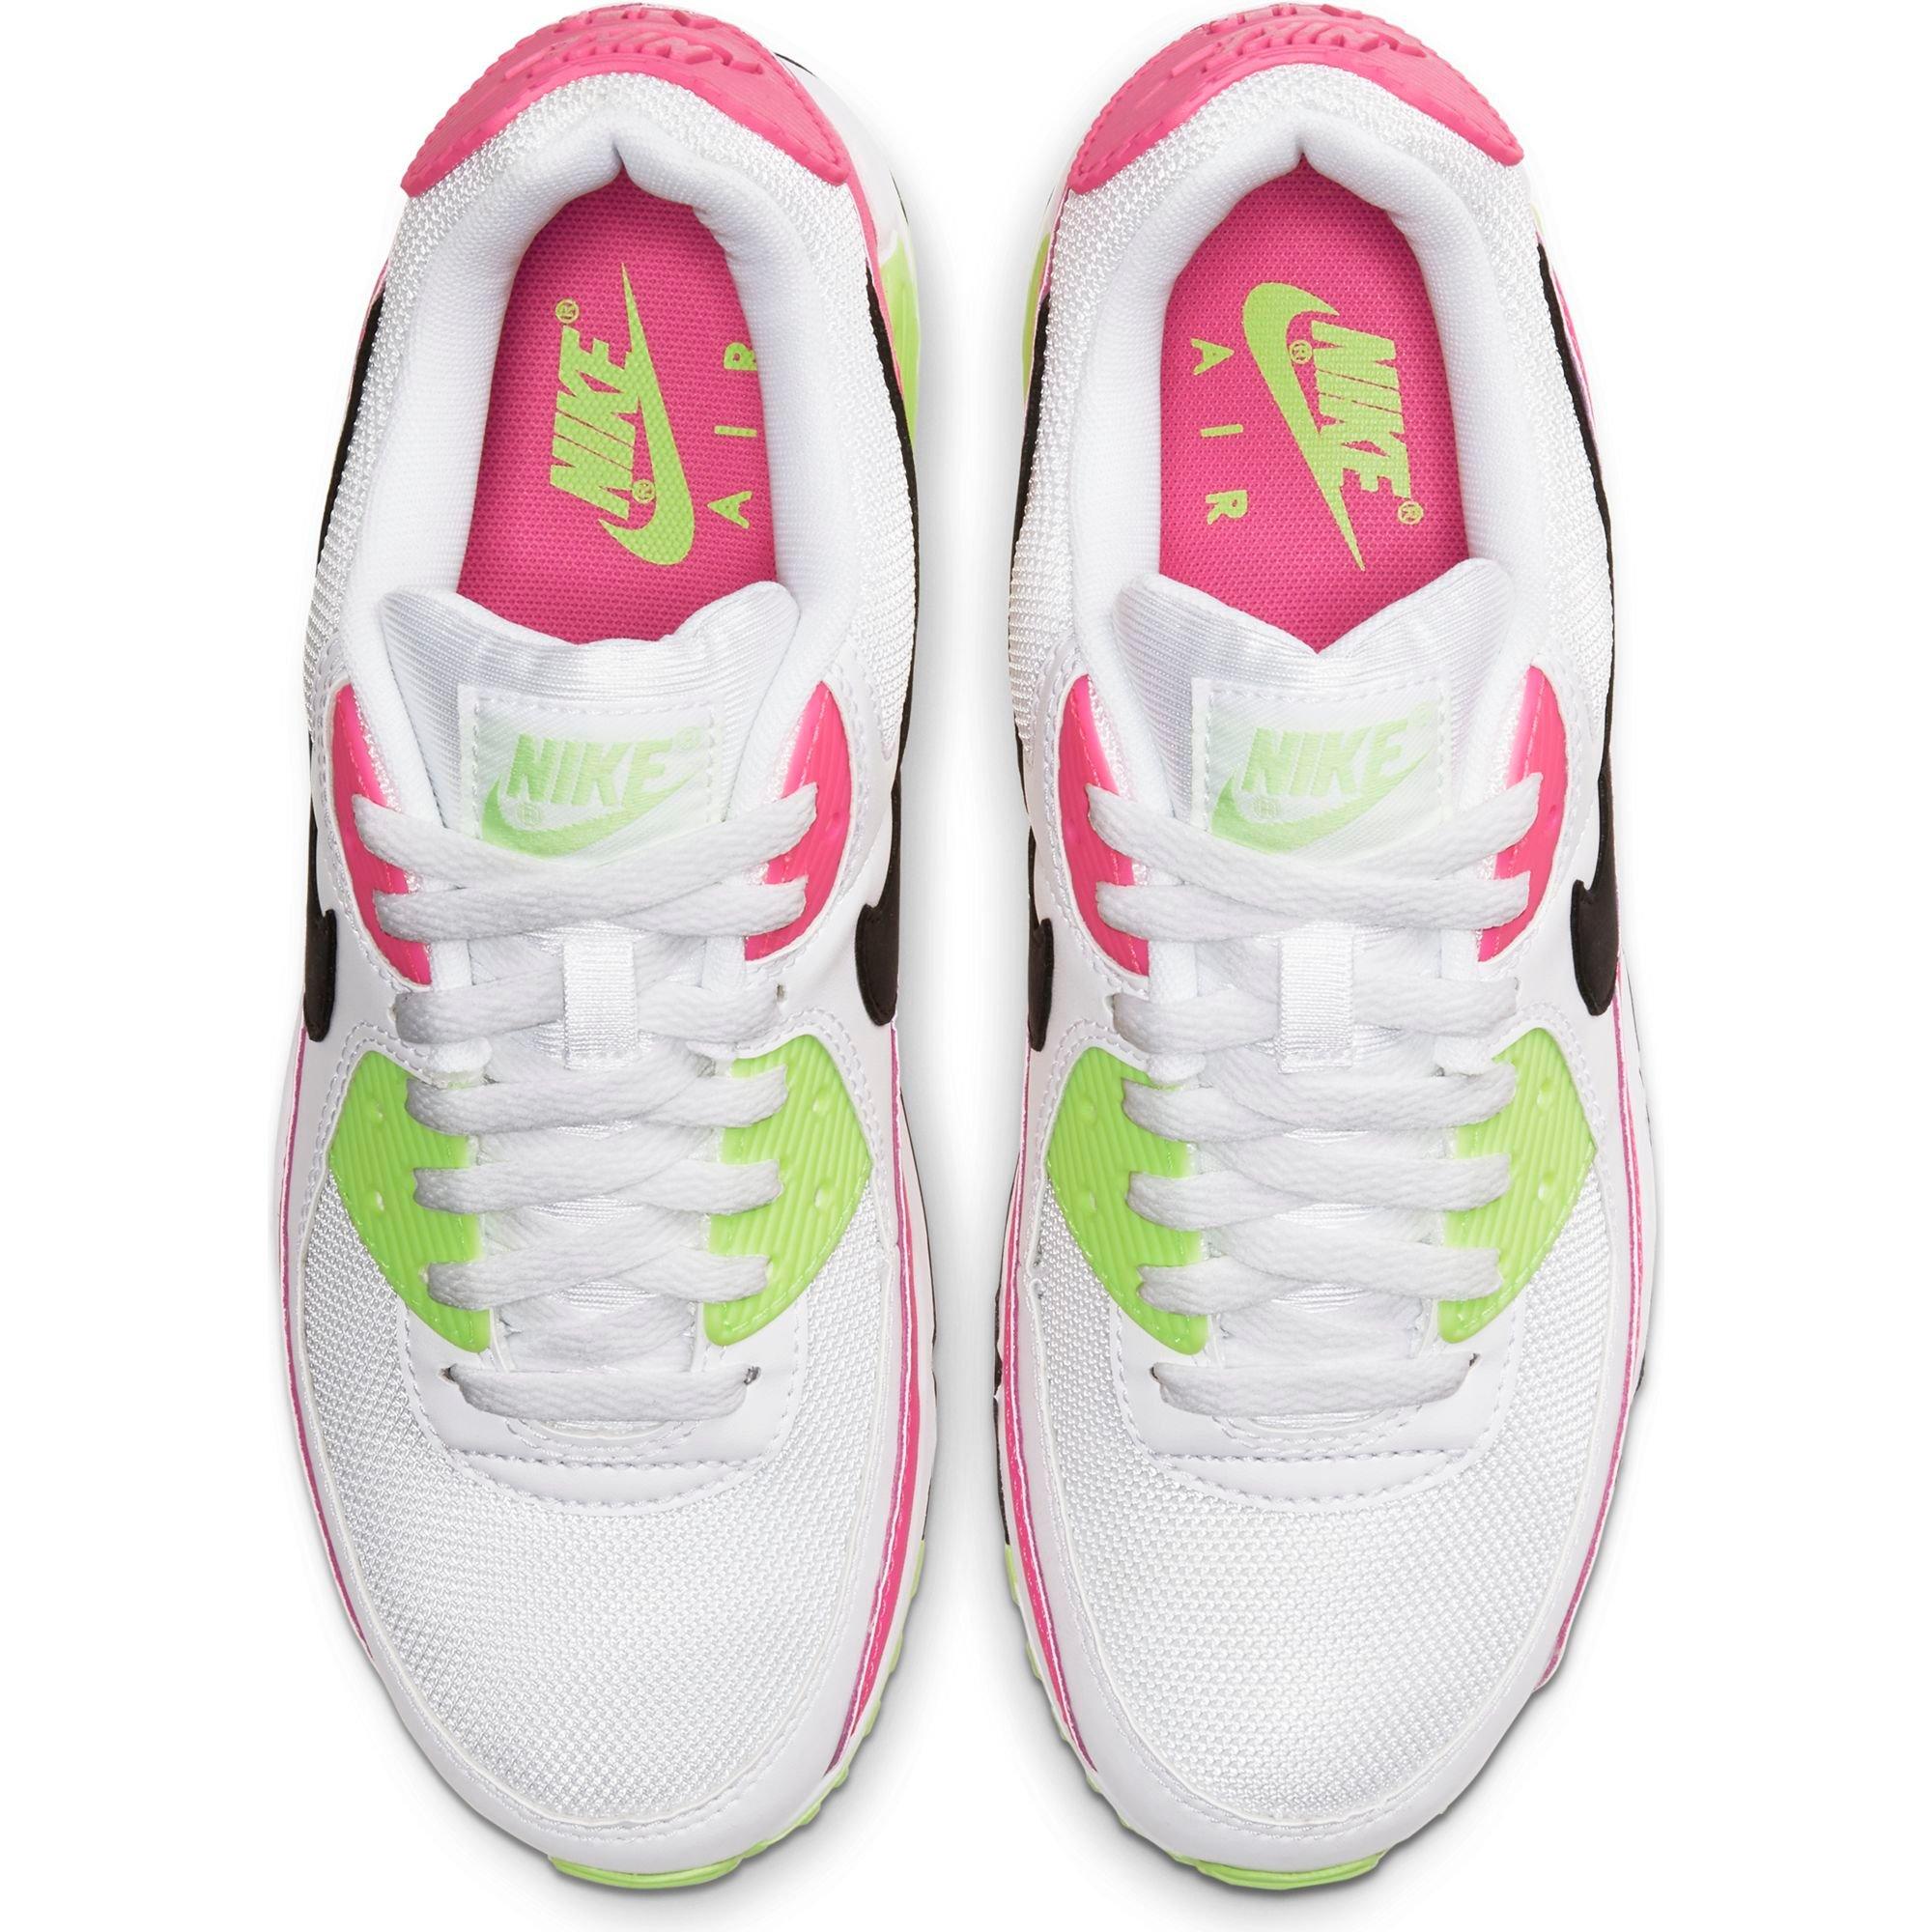 white green and pink air max